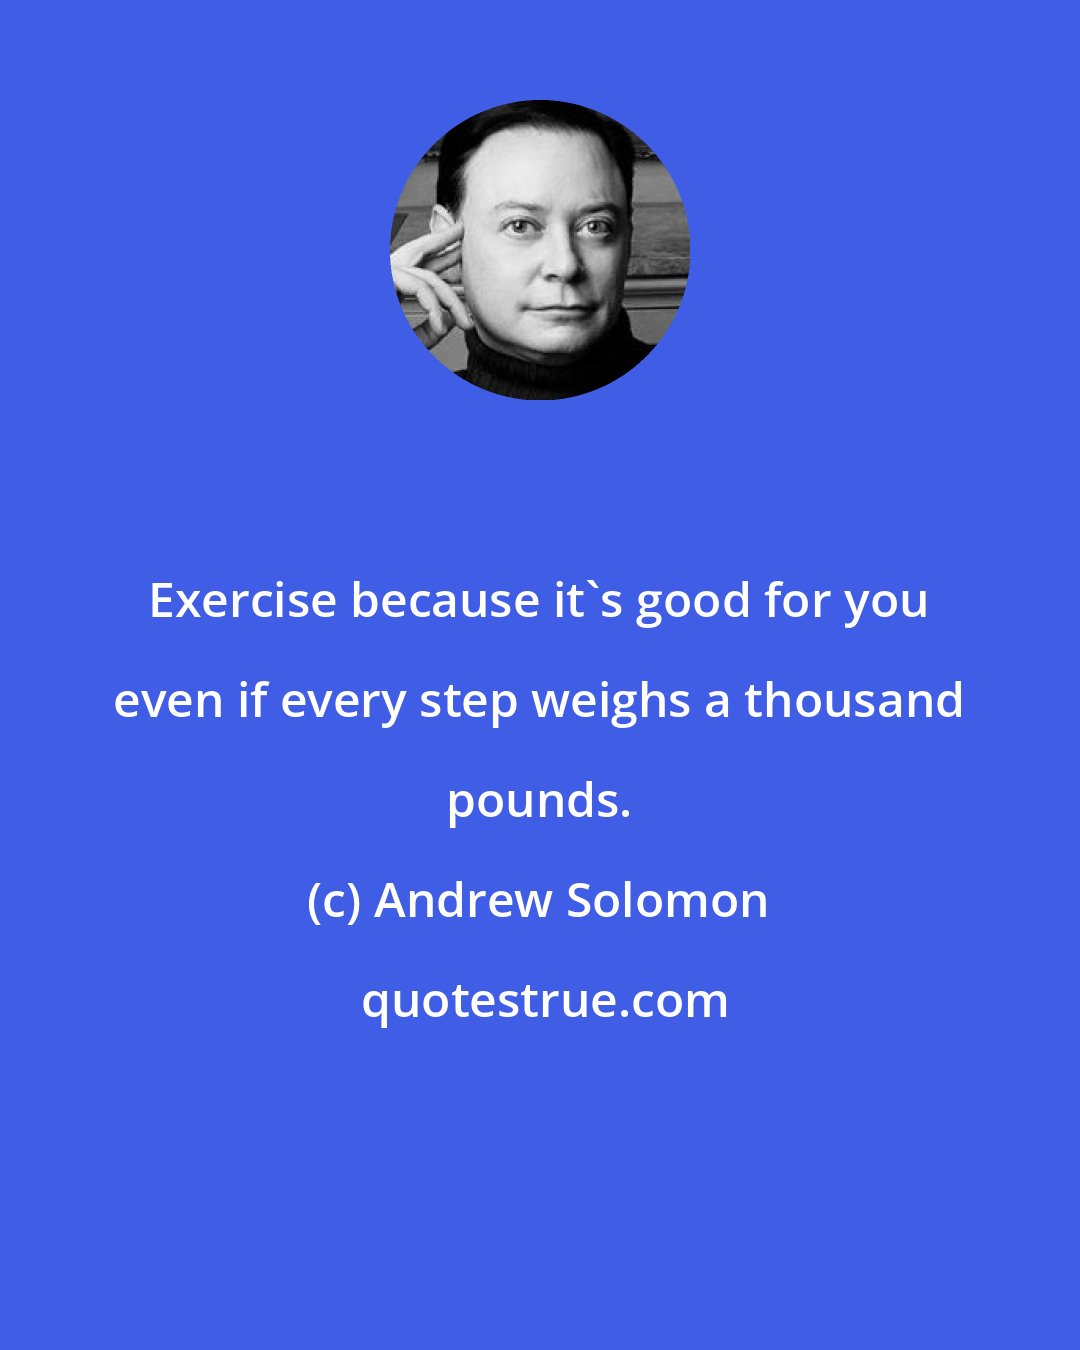 Andrew Solomon: Exercise because it's good for you even if every step weighs a thousand pounds.